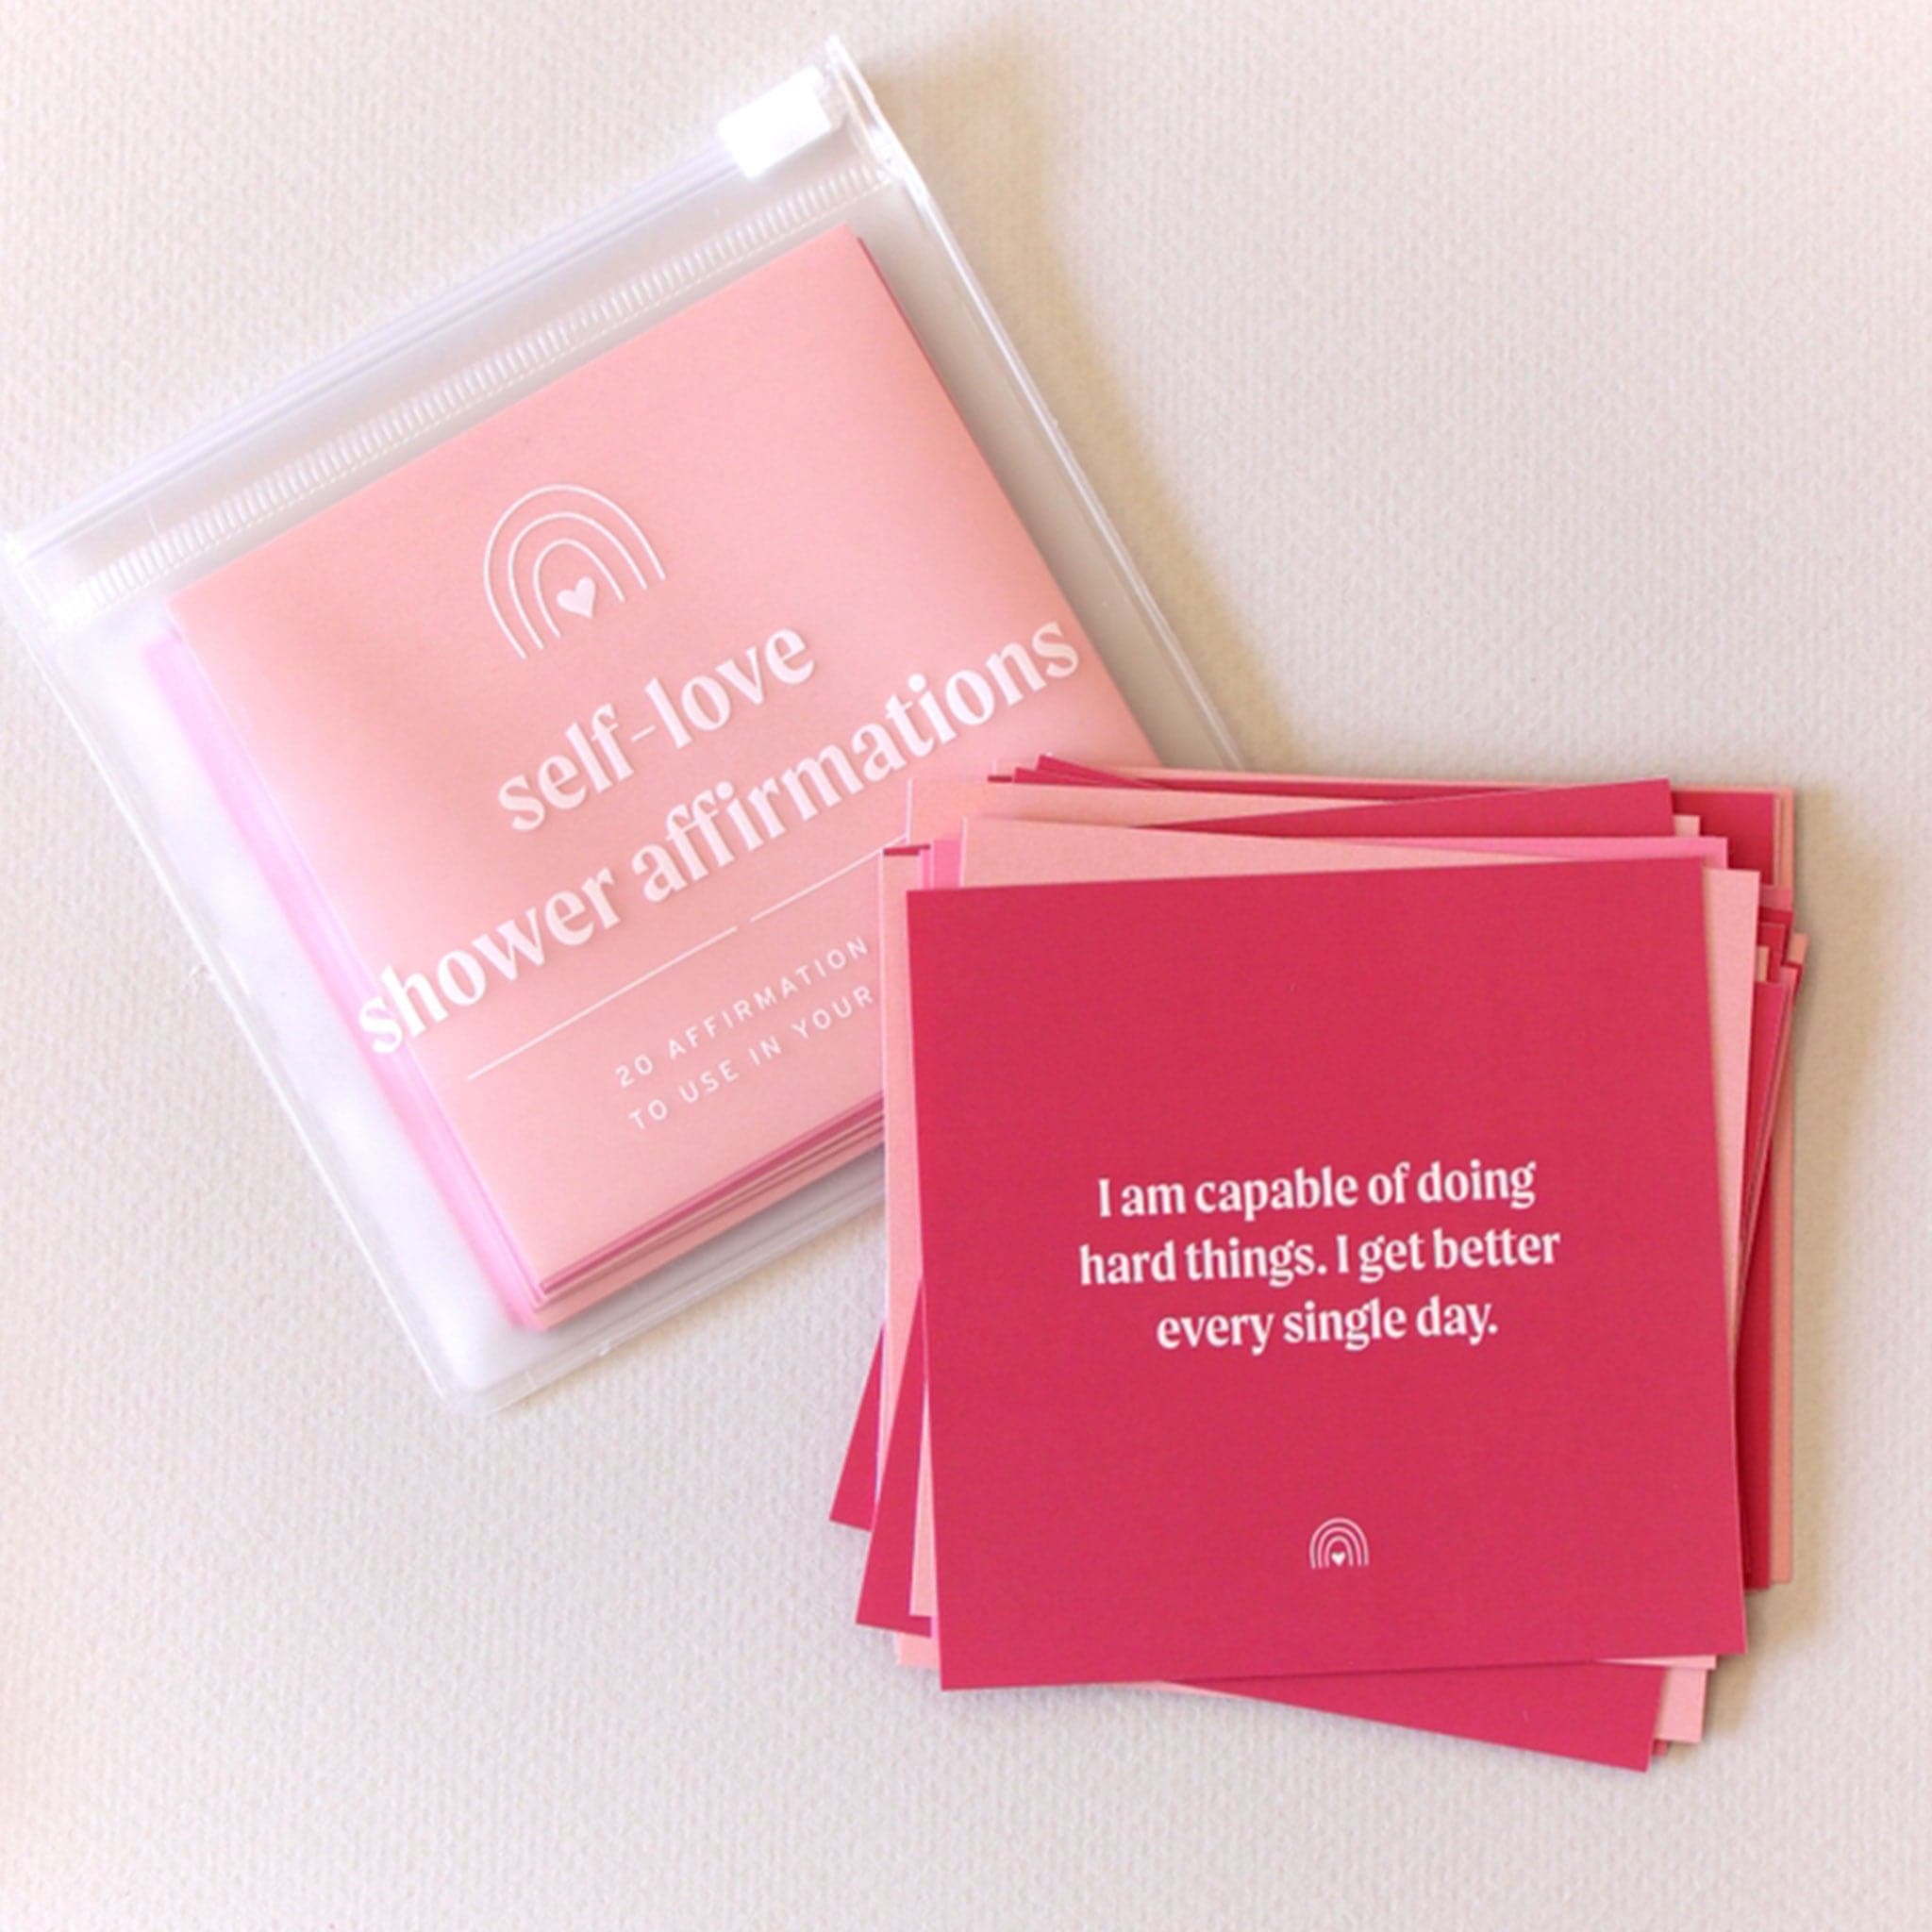 Different tones of pink cards that each have an uplifting affirmation on them for you to read and stick on the walls of your shower. 